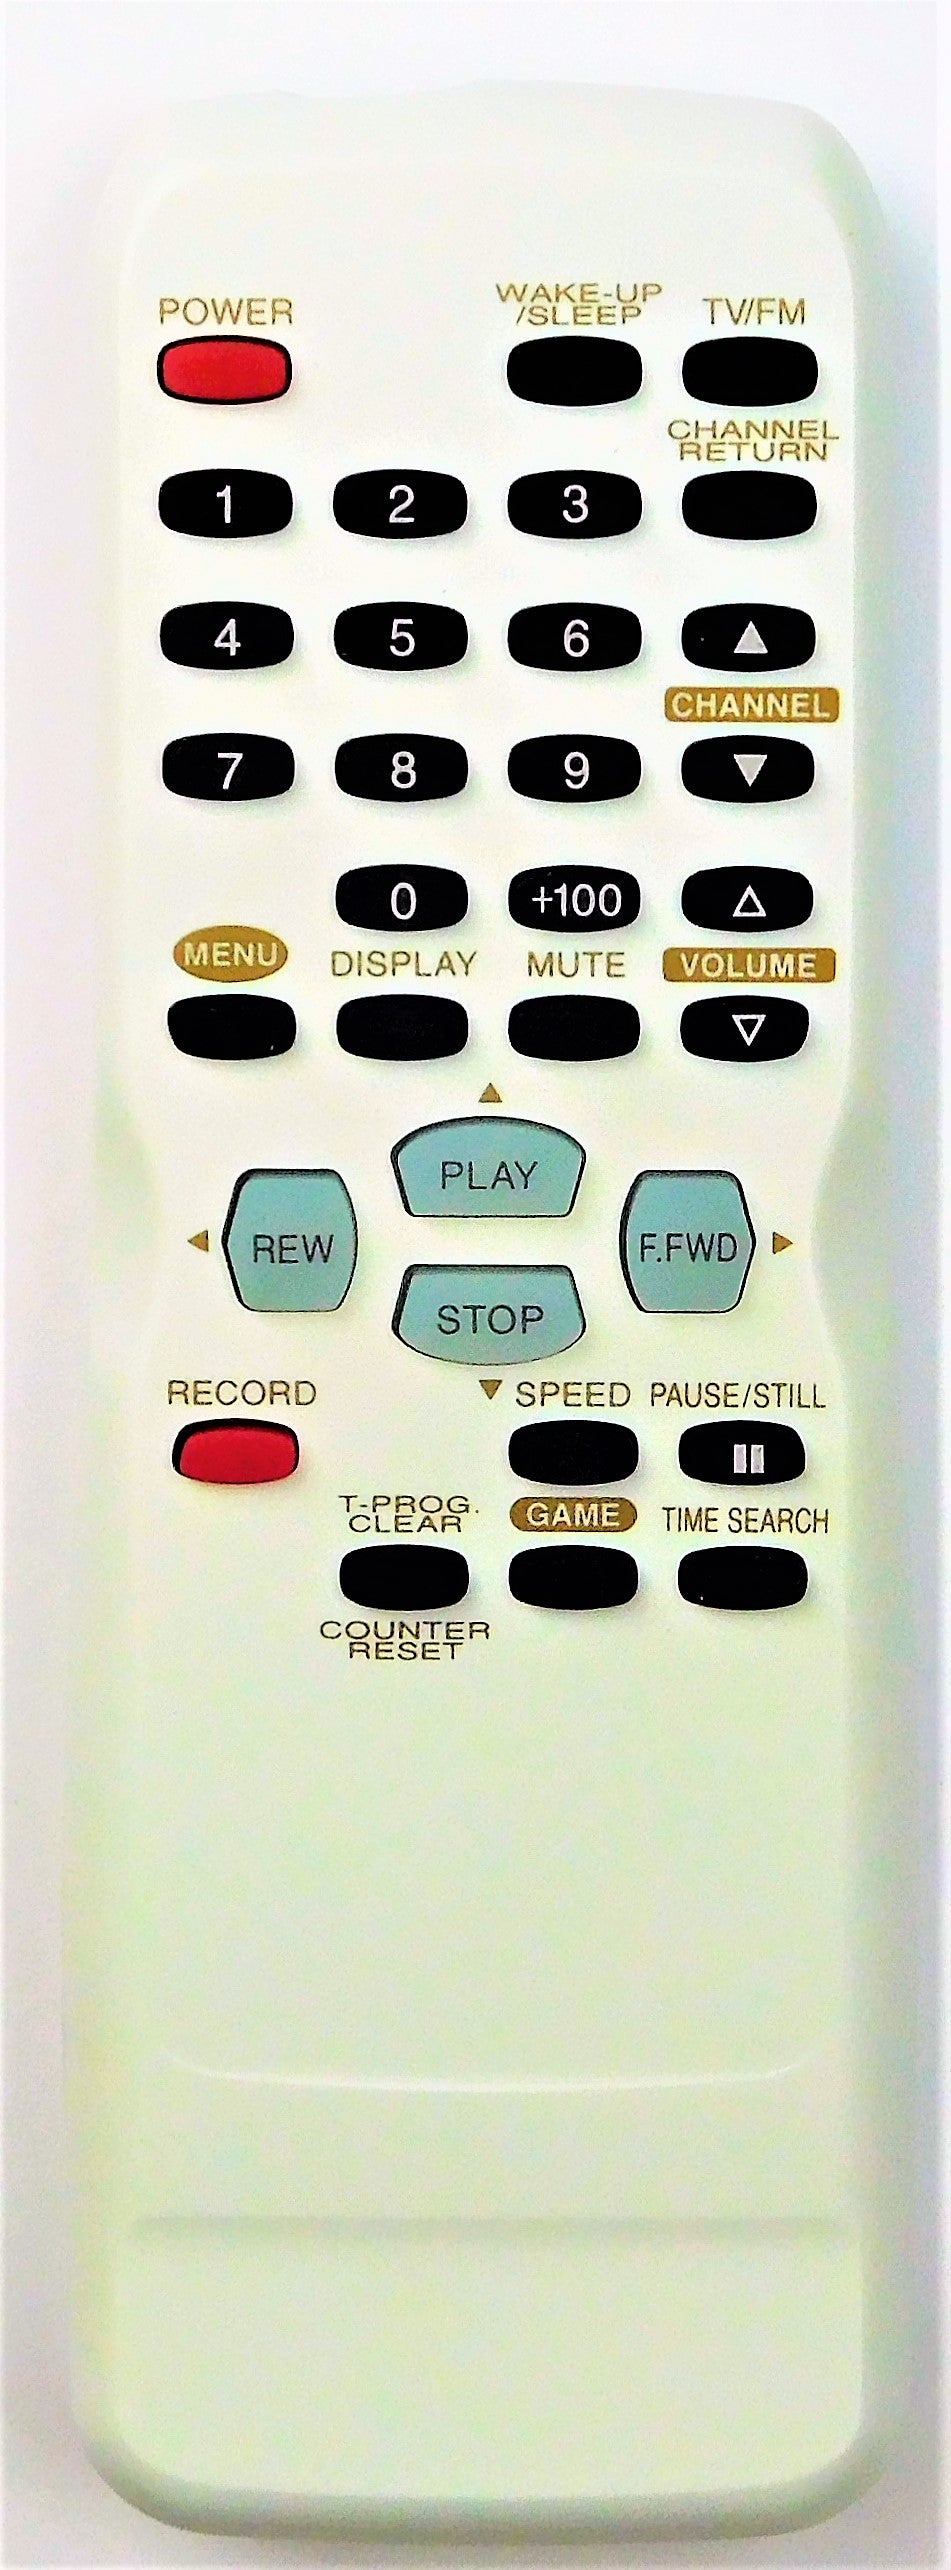 OEM replacement remote control for Sylvania CRT TV & VCR COMBOs N0125UD